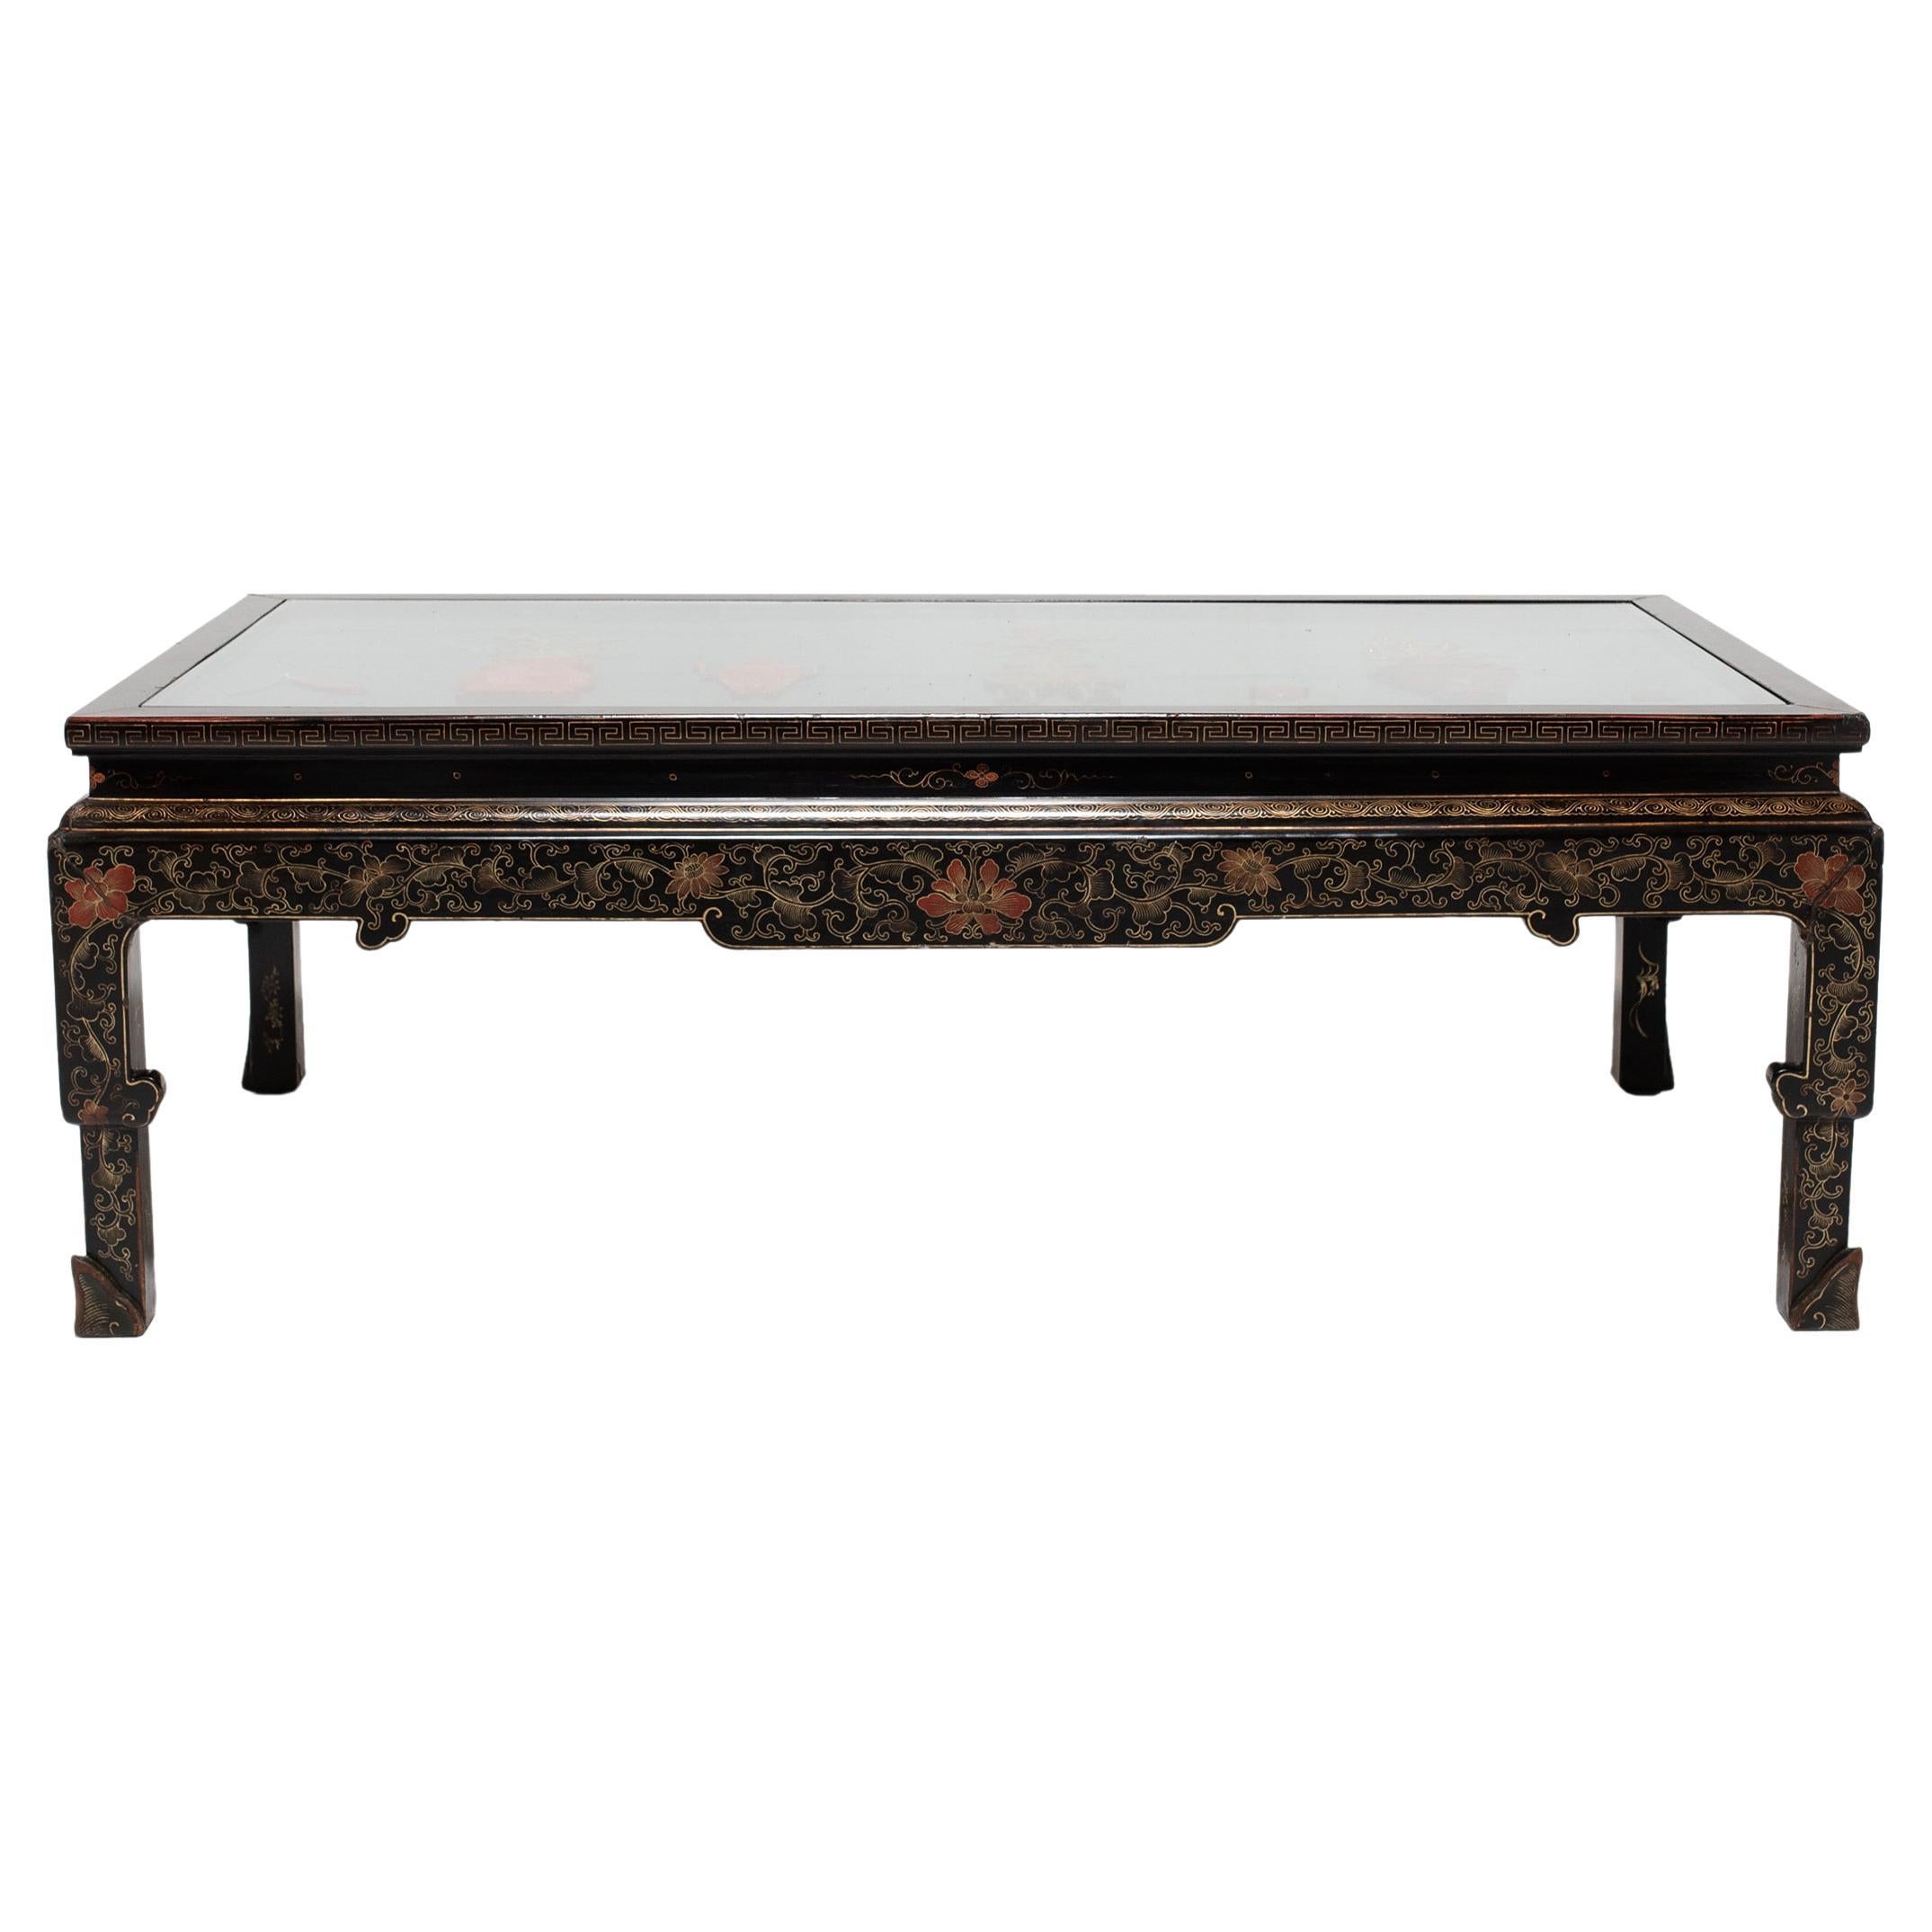 Painted Chinese Kang Table with Stone Inlay, c. 1900